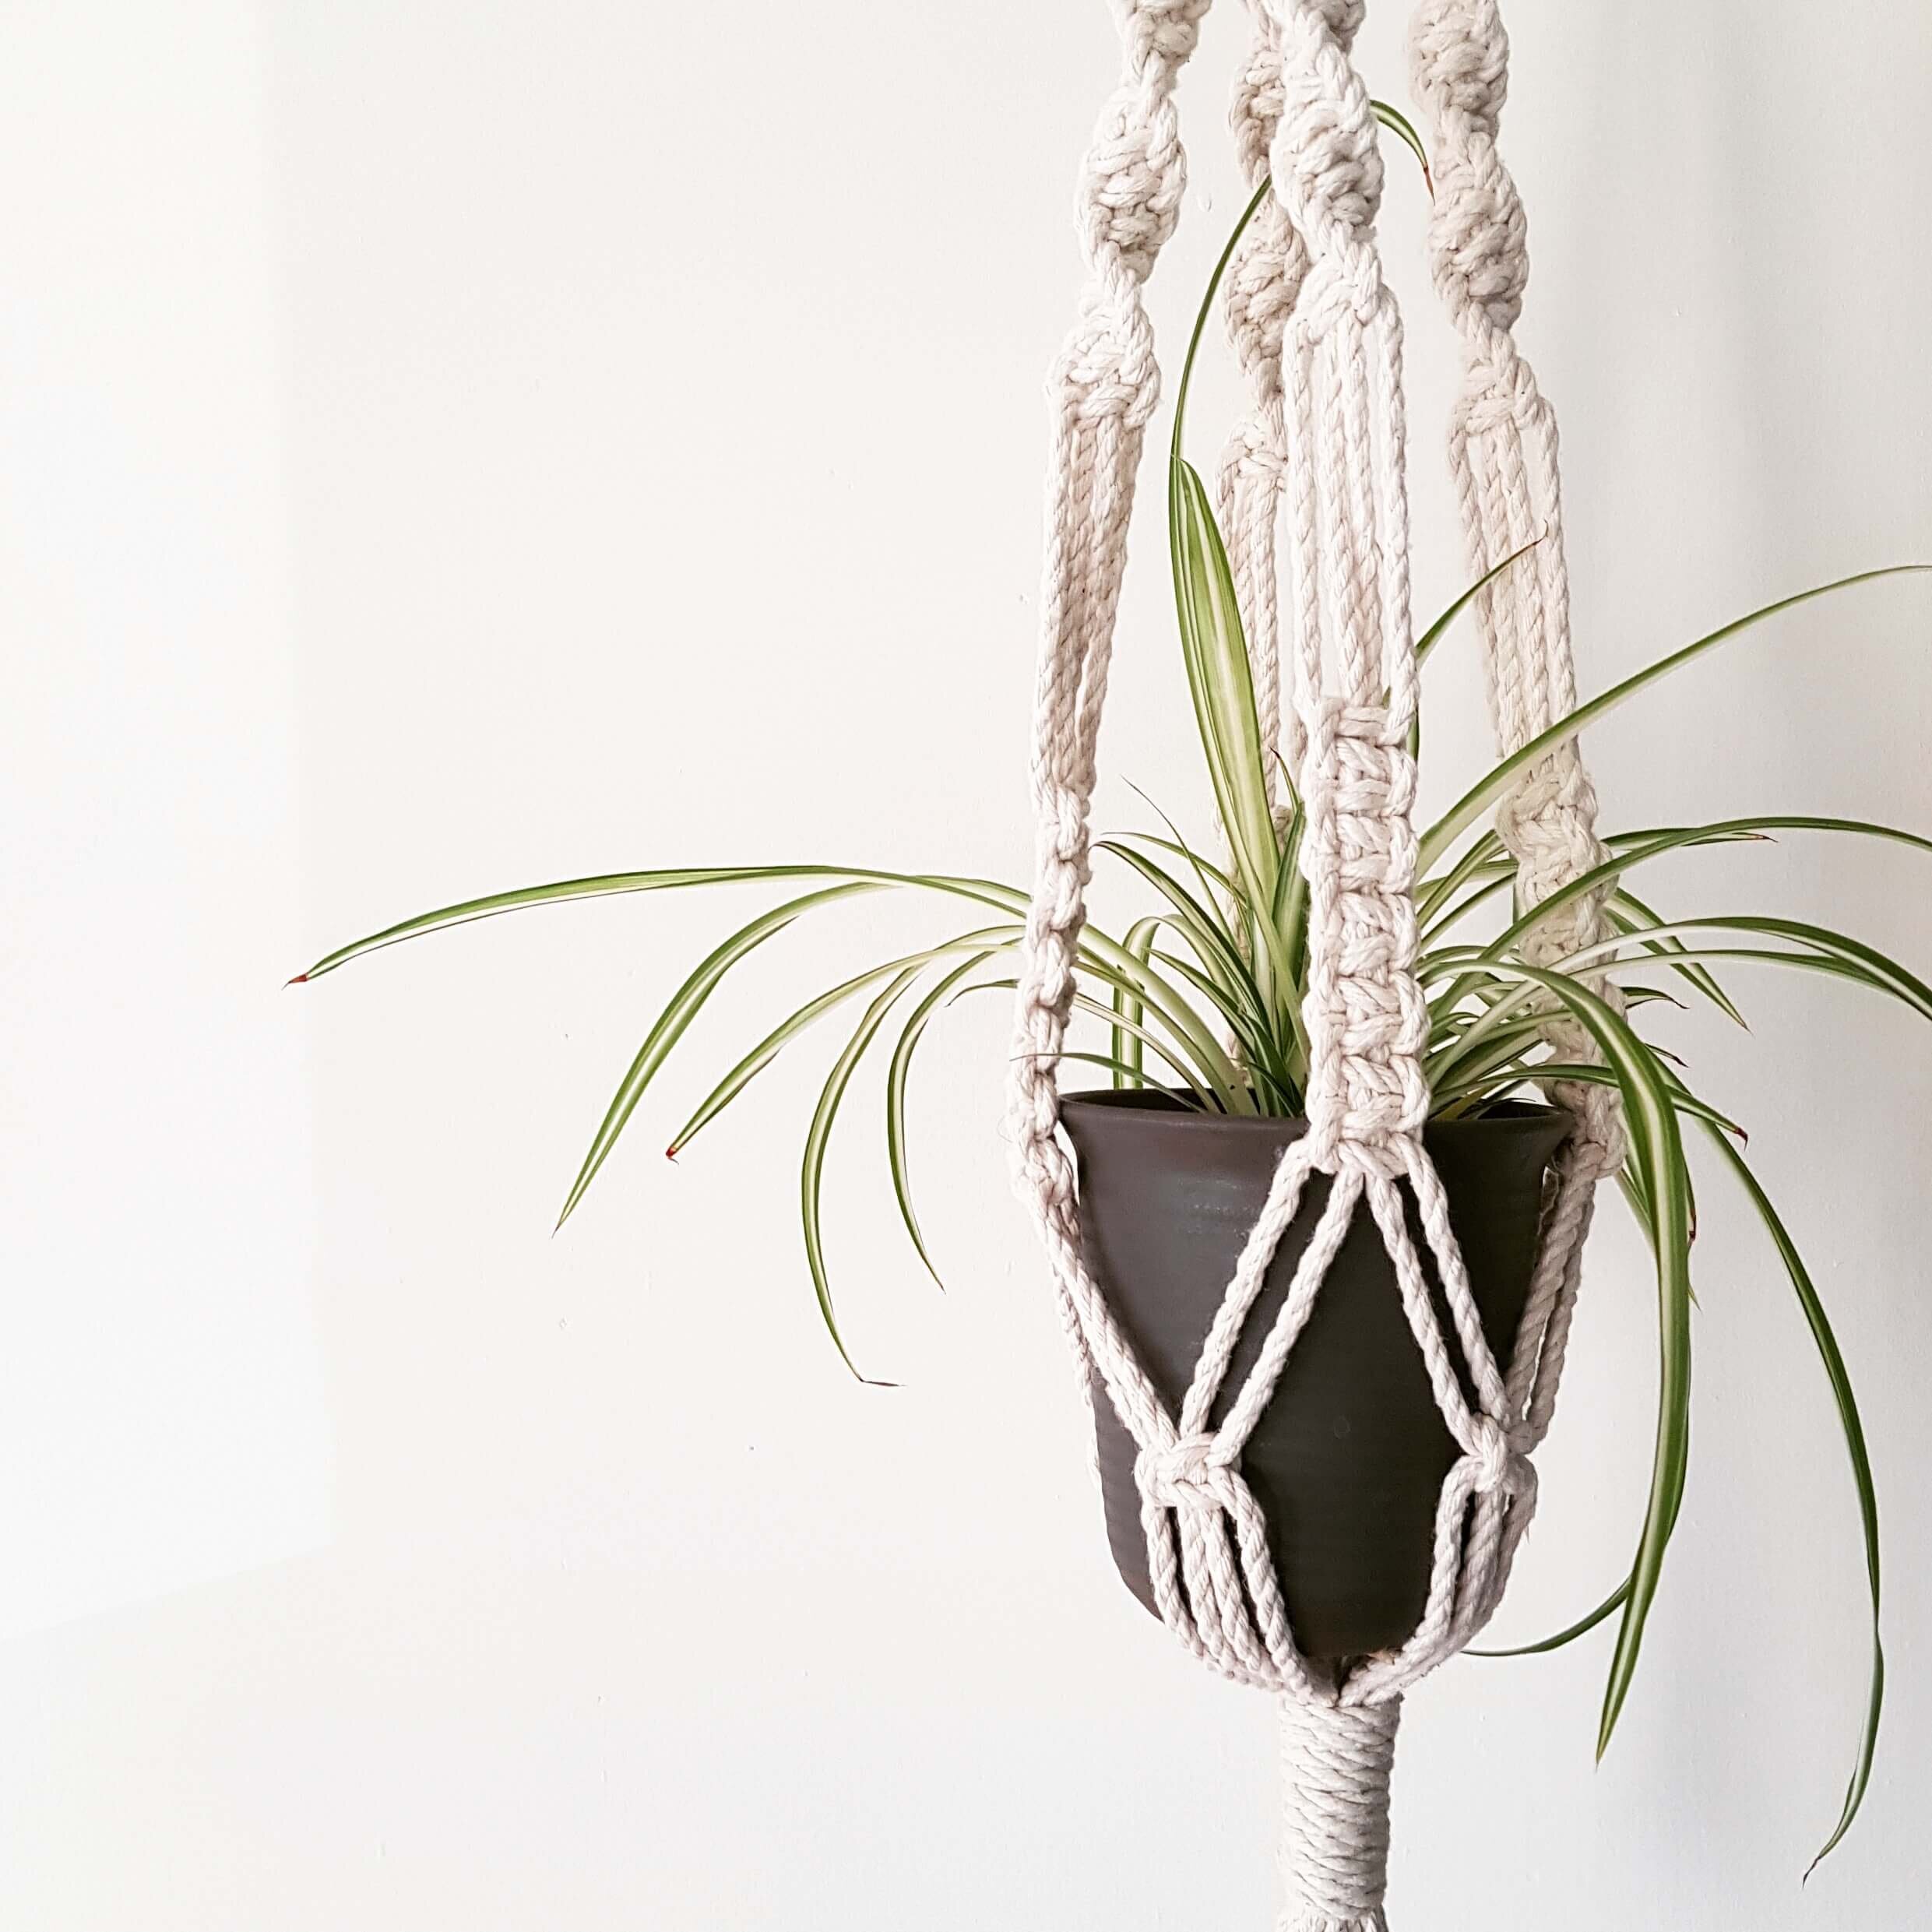 Introducing our macrame plant hanger kit — Cosy Craft Club